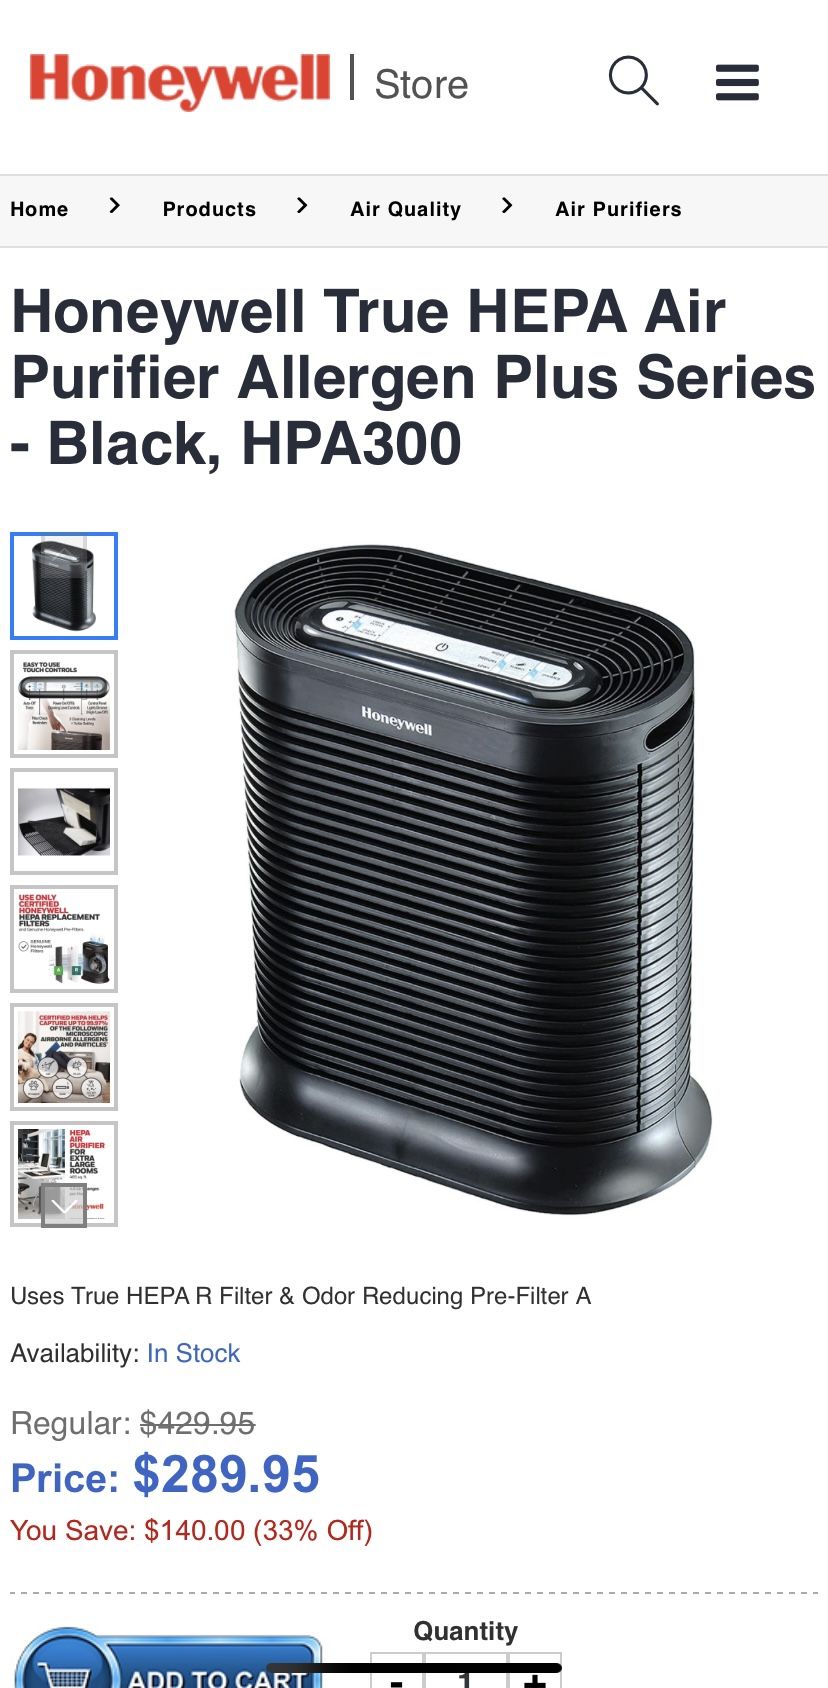 Honeywell HPA300 HEPA Air Purifier Extra-Large Room (465 sq. ft), Black 